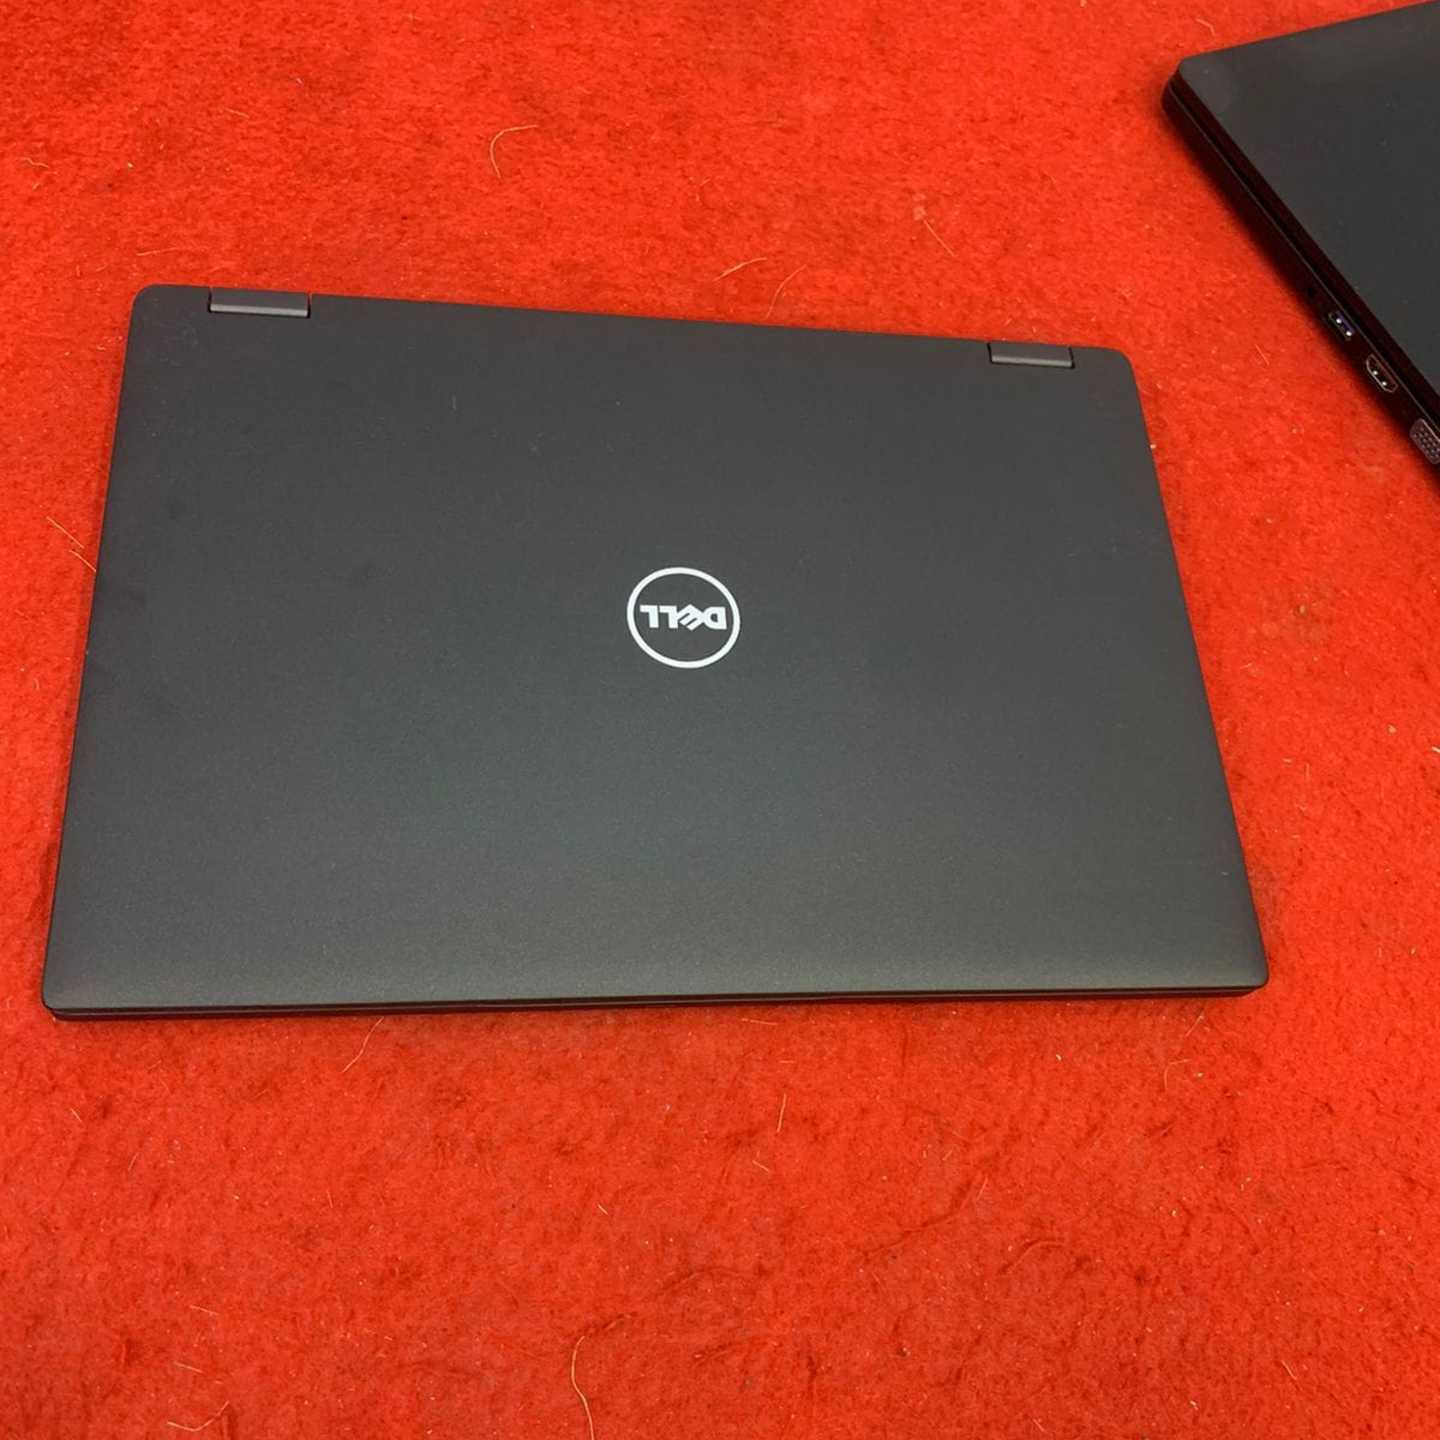 Import  Dell Latitude E5289 Intel Core i5 7th gen 8gb ram 256gb ssd Touch Screen Full x360 rotate  Windows 10 A++++++ Condition  Quantity available  Best nd fixe